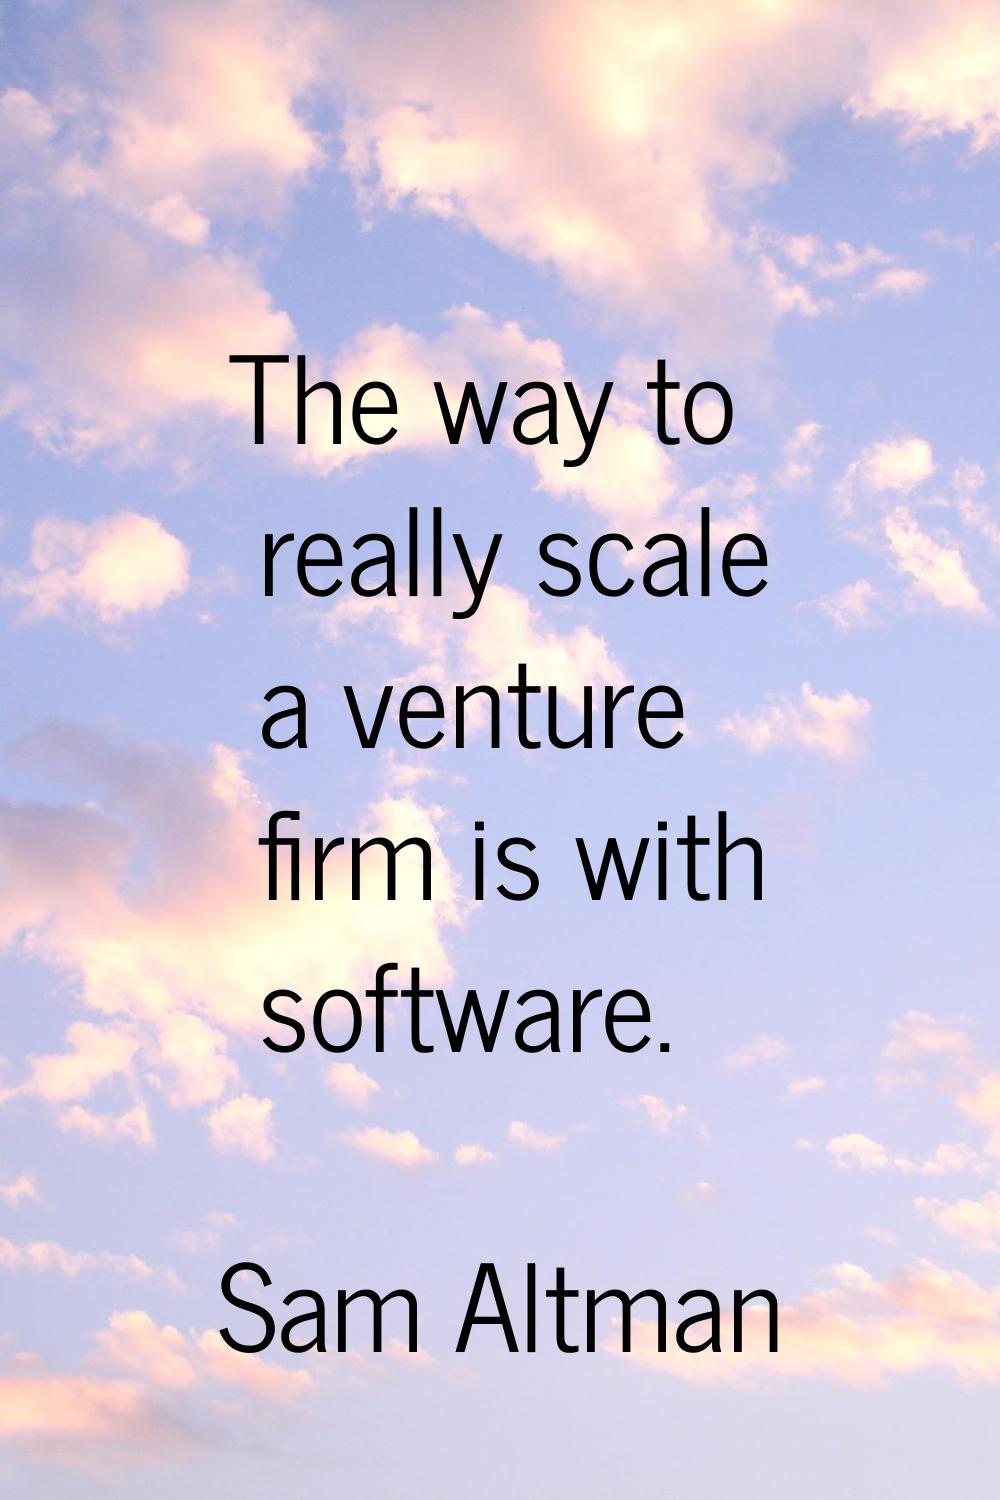 The way to really scale a venture firm is with software.